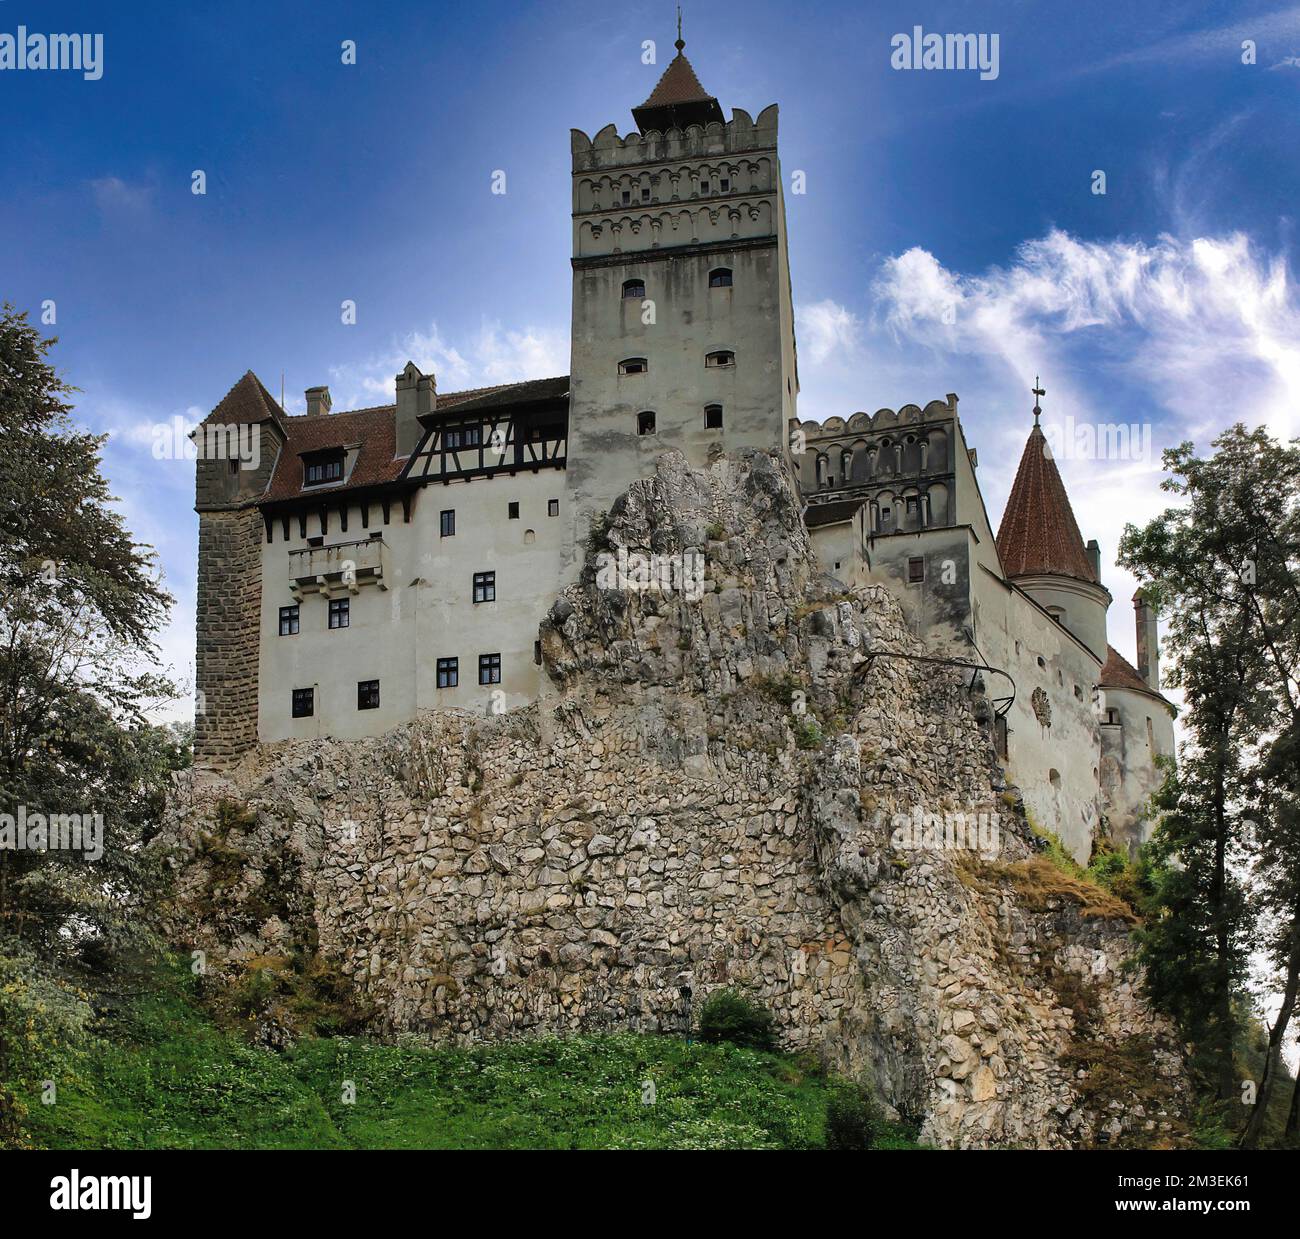 Bran Castle, known as Dracula's Castle, is the most famous and visited fortress in Transylvania (Romania) and is located in Bran, near the city of Bra Stock Photo